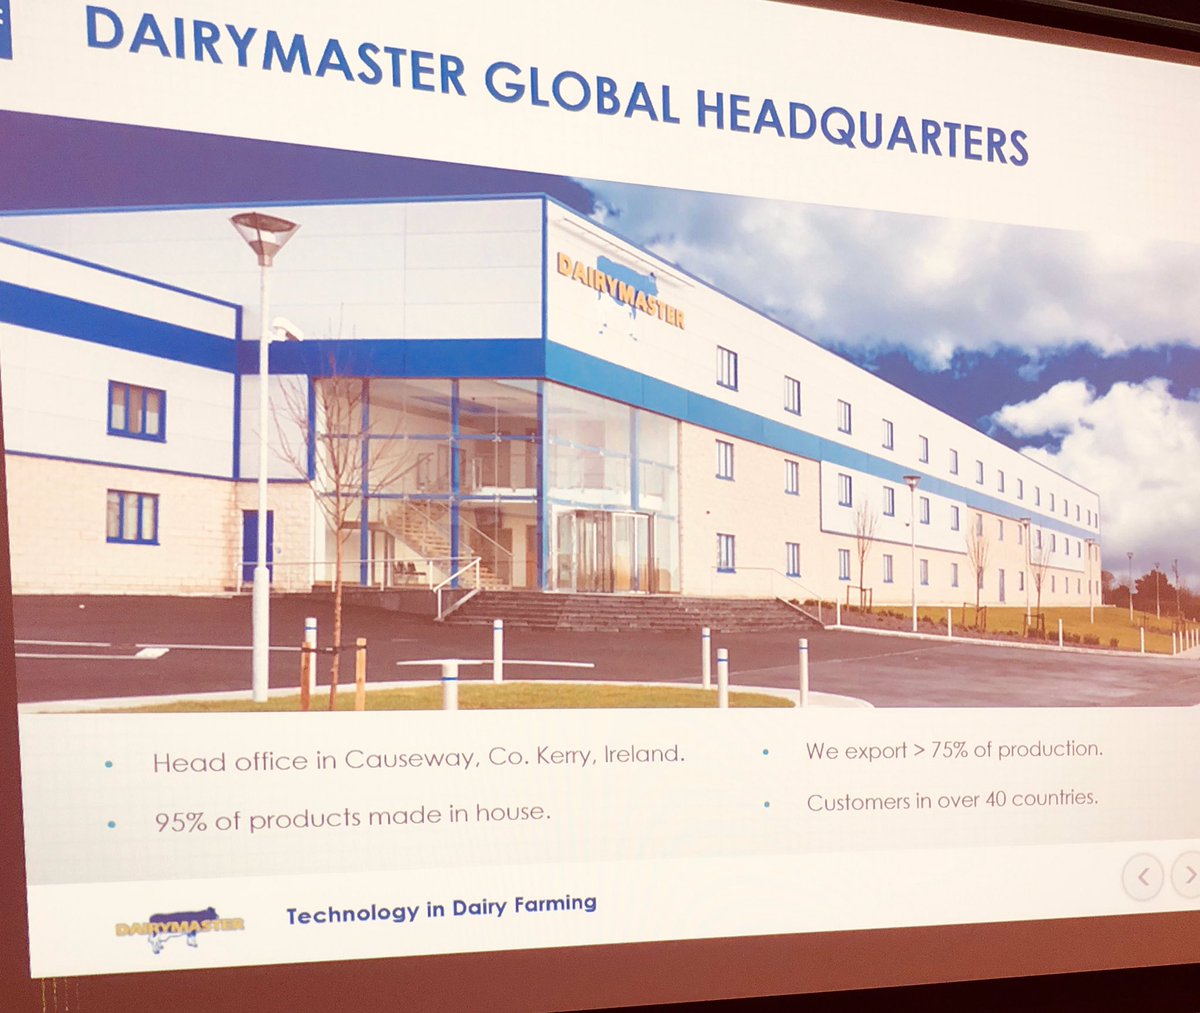 Just completed this mornings tour of @dairymaster, such a fantastic engineering company who have been pioneers of the dairy industry for decades. Thanks to @EngIreThomond for organising! #Engineering